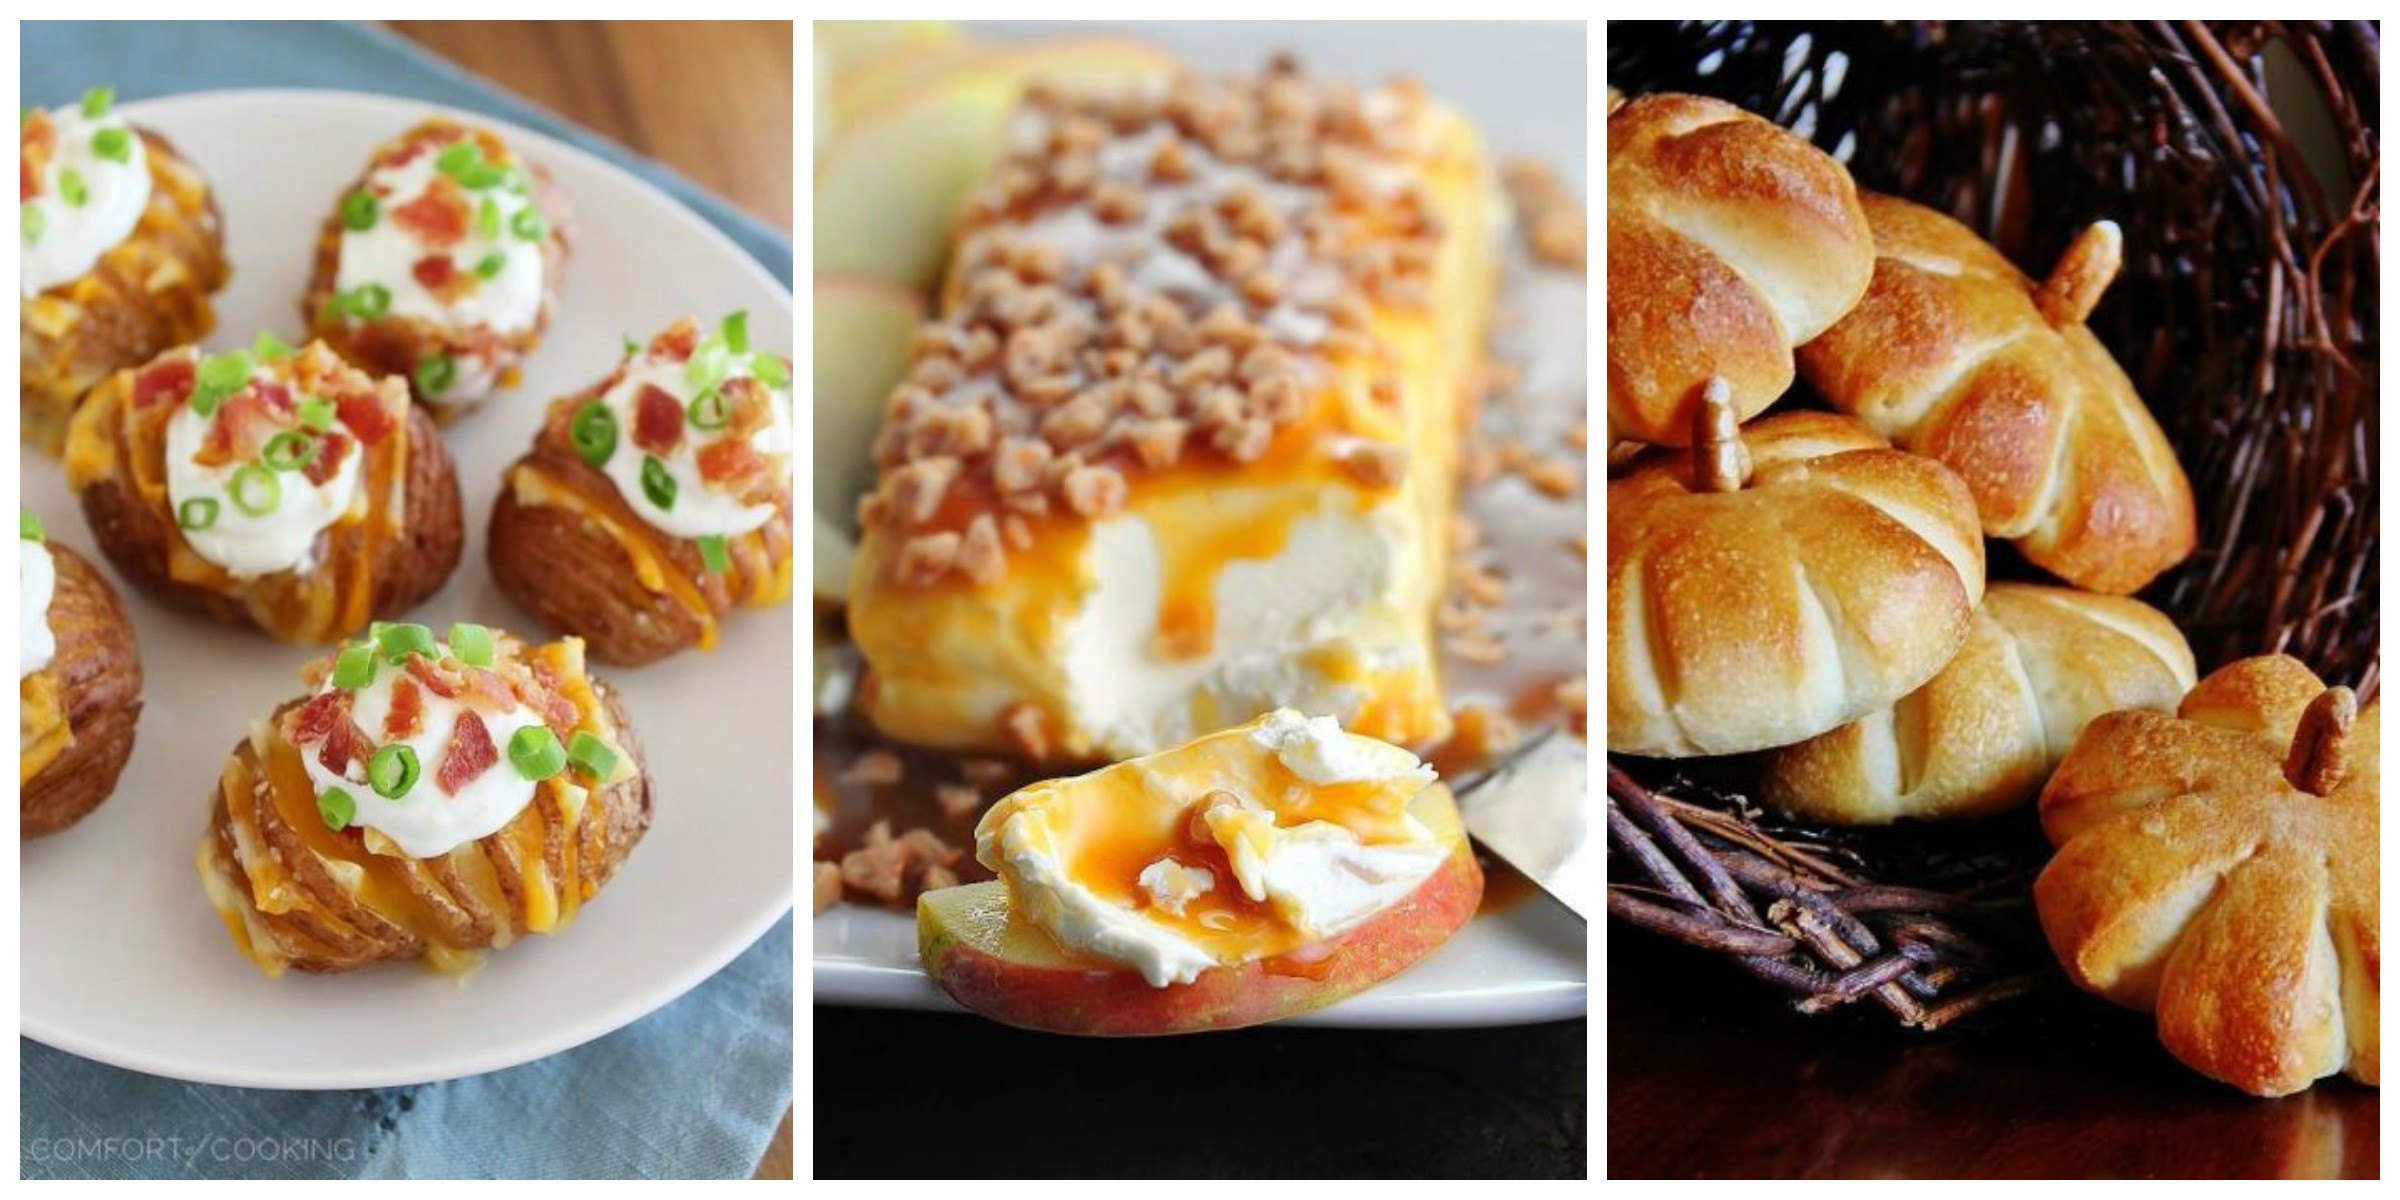 Easy Thanksgiving Appetizers
 33 Easy Thanksgiving Appetizers Best Recipes for